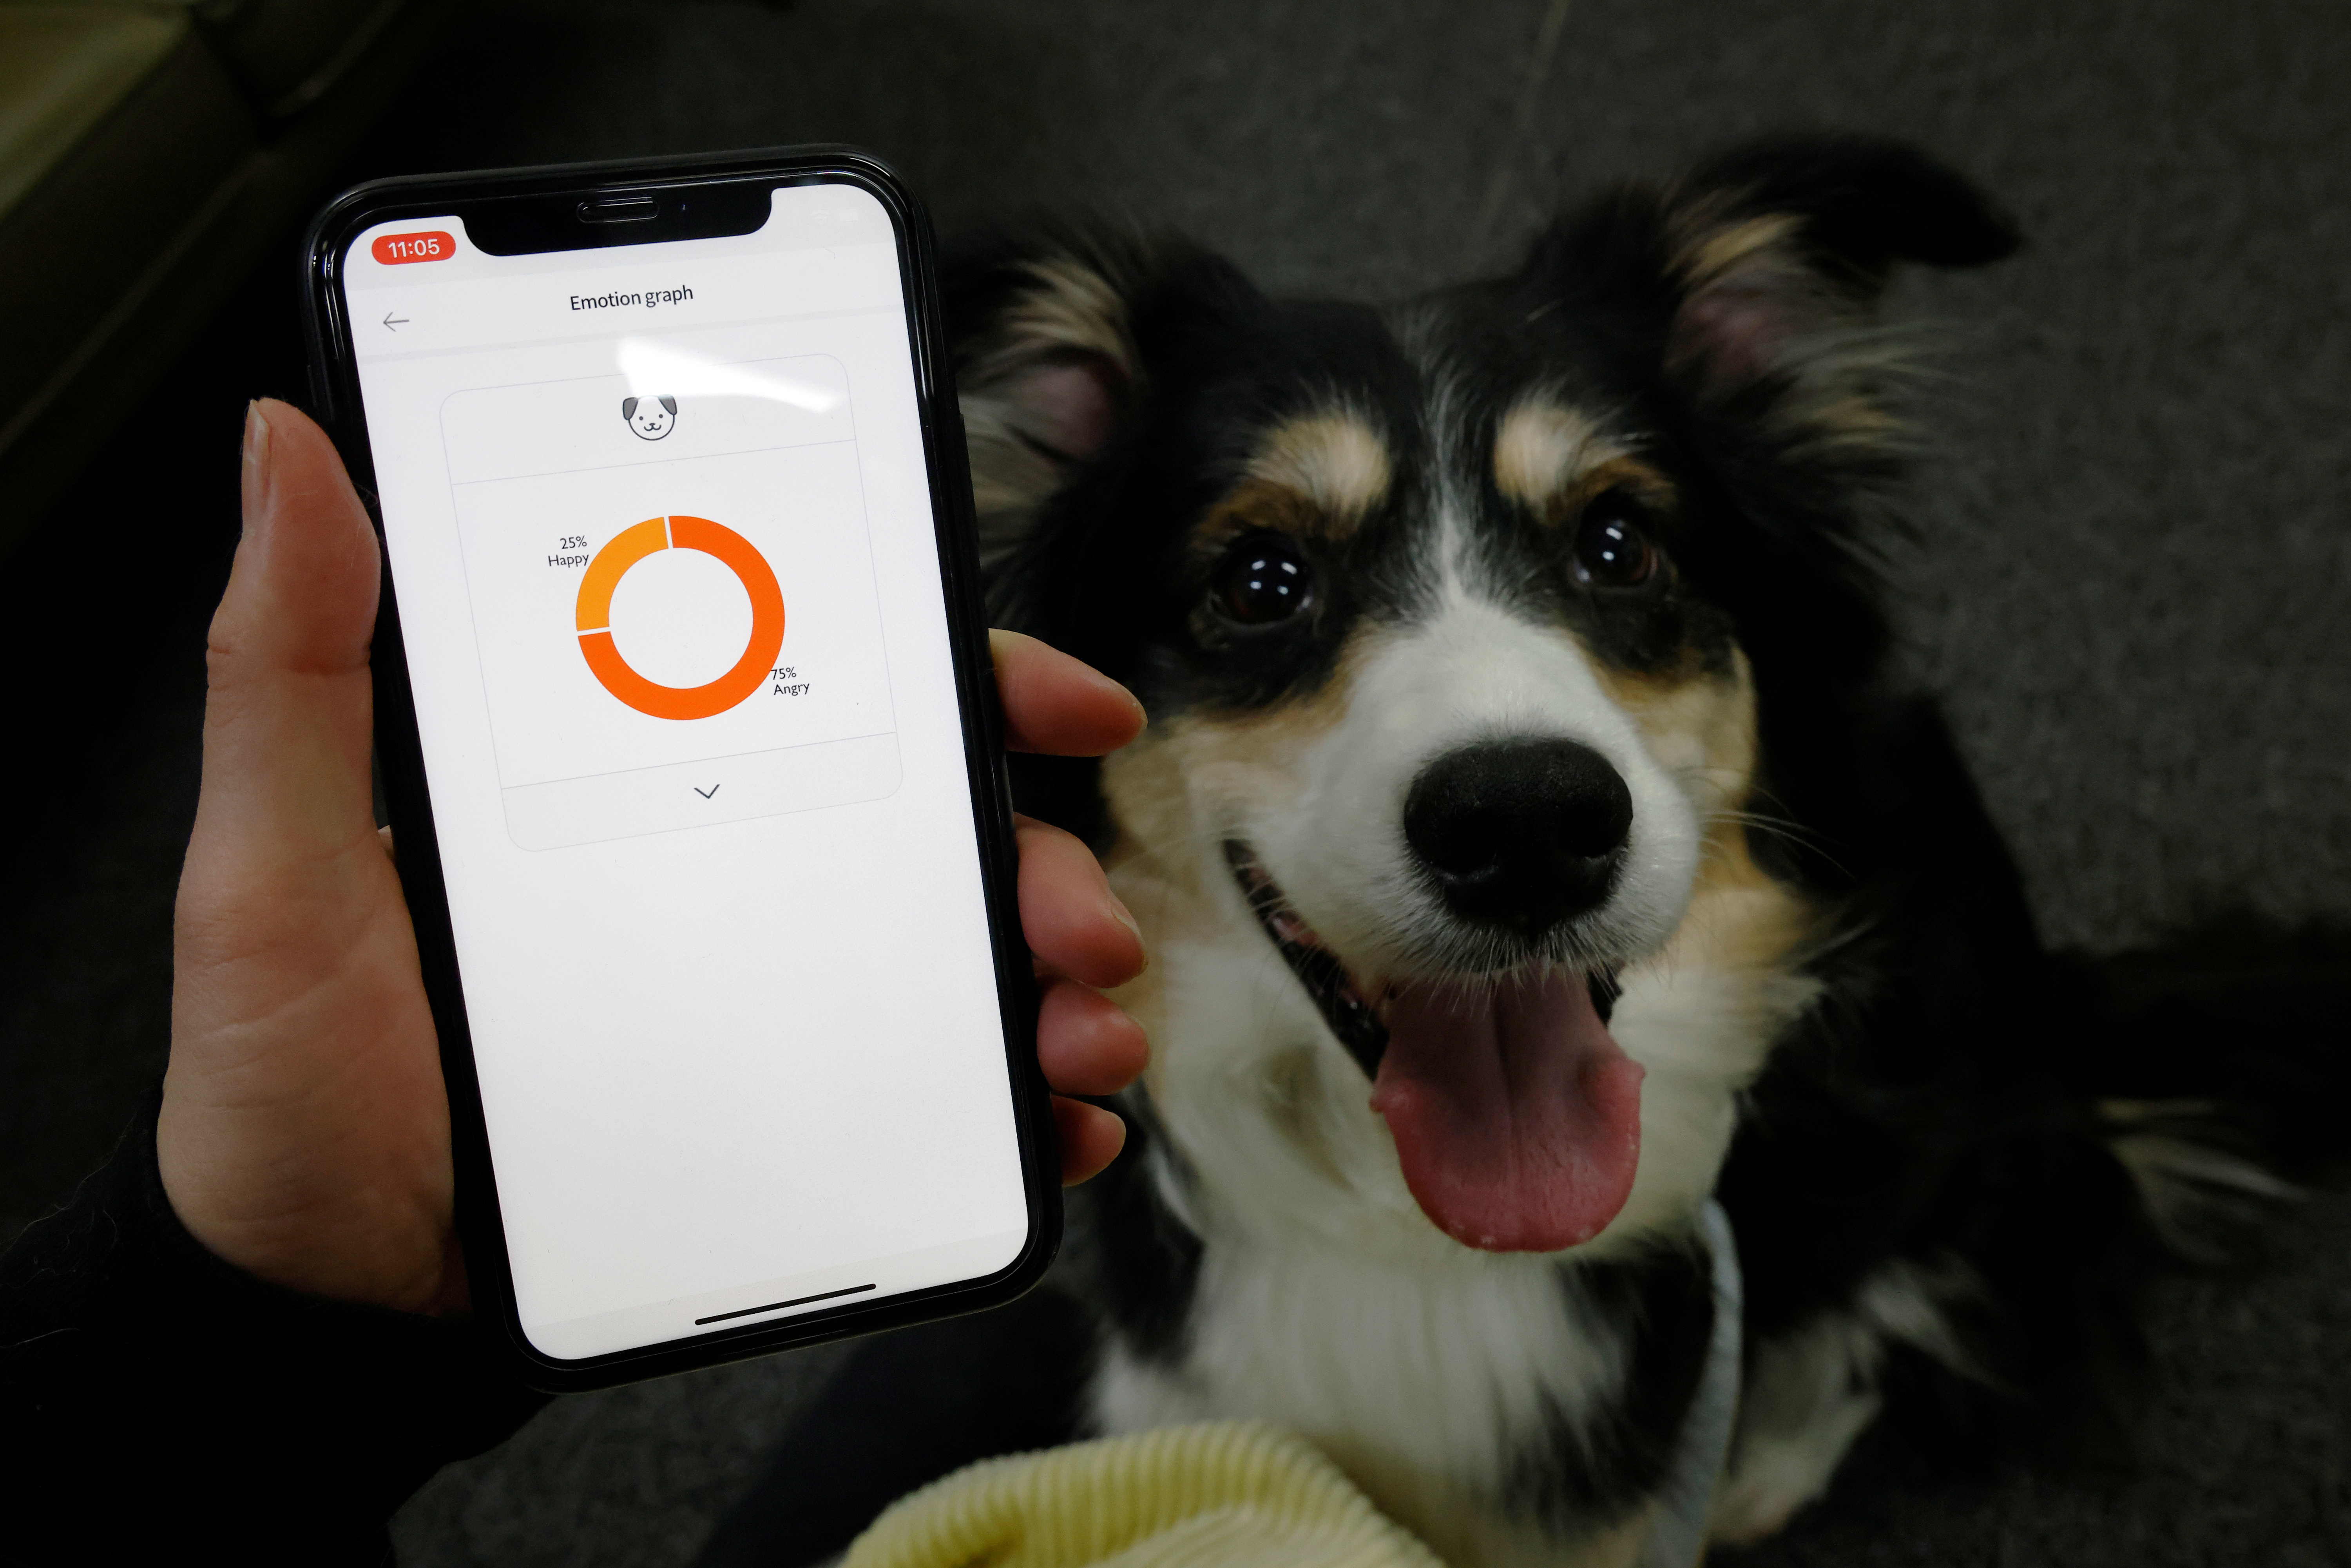 Moon Sae-mi tries out Petpuls, an AI-powered smart dog collar, with her dog Godot during a demonstration in Seoul